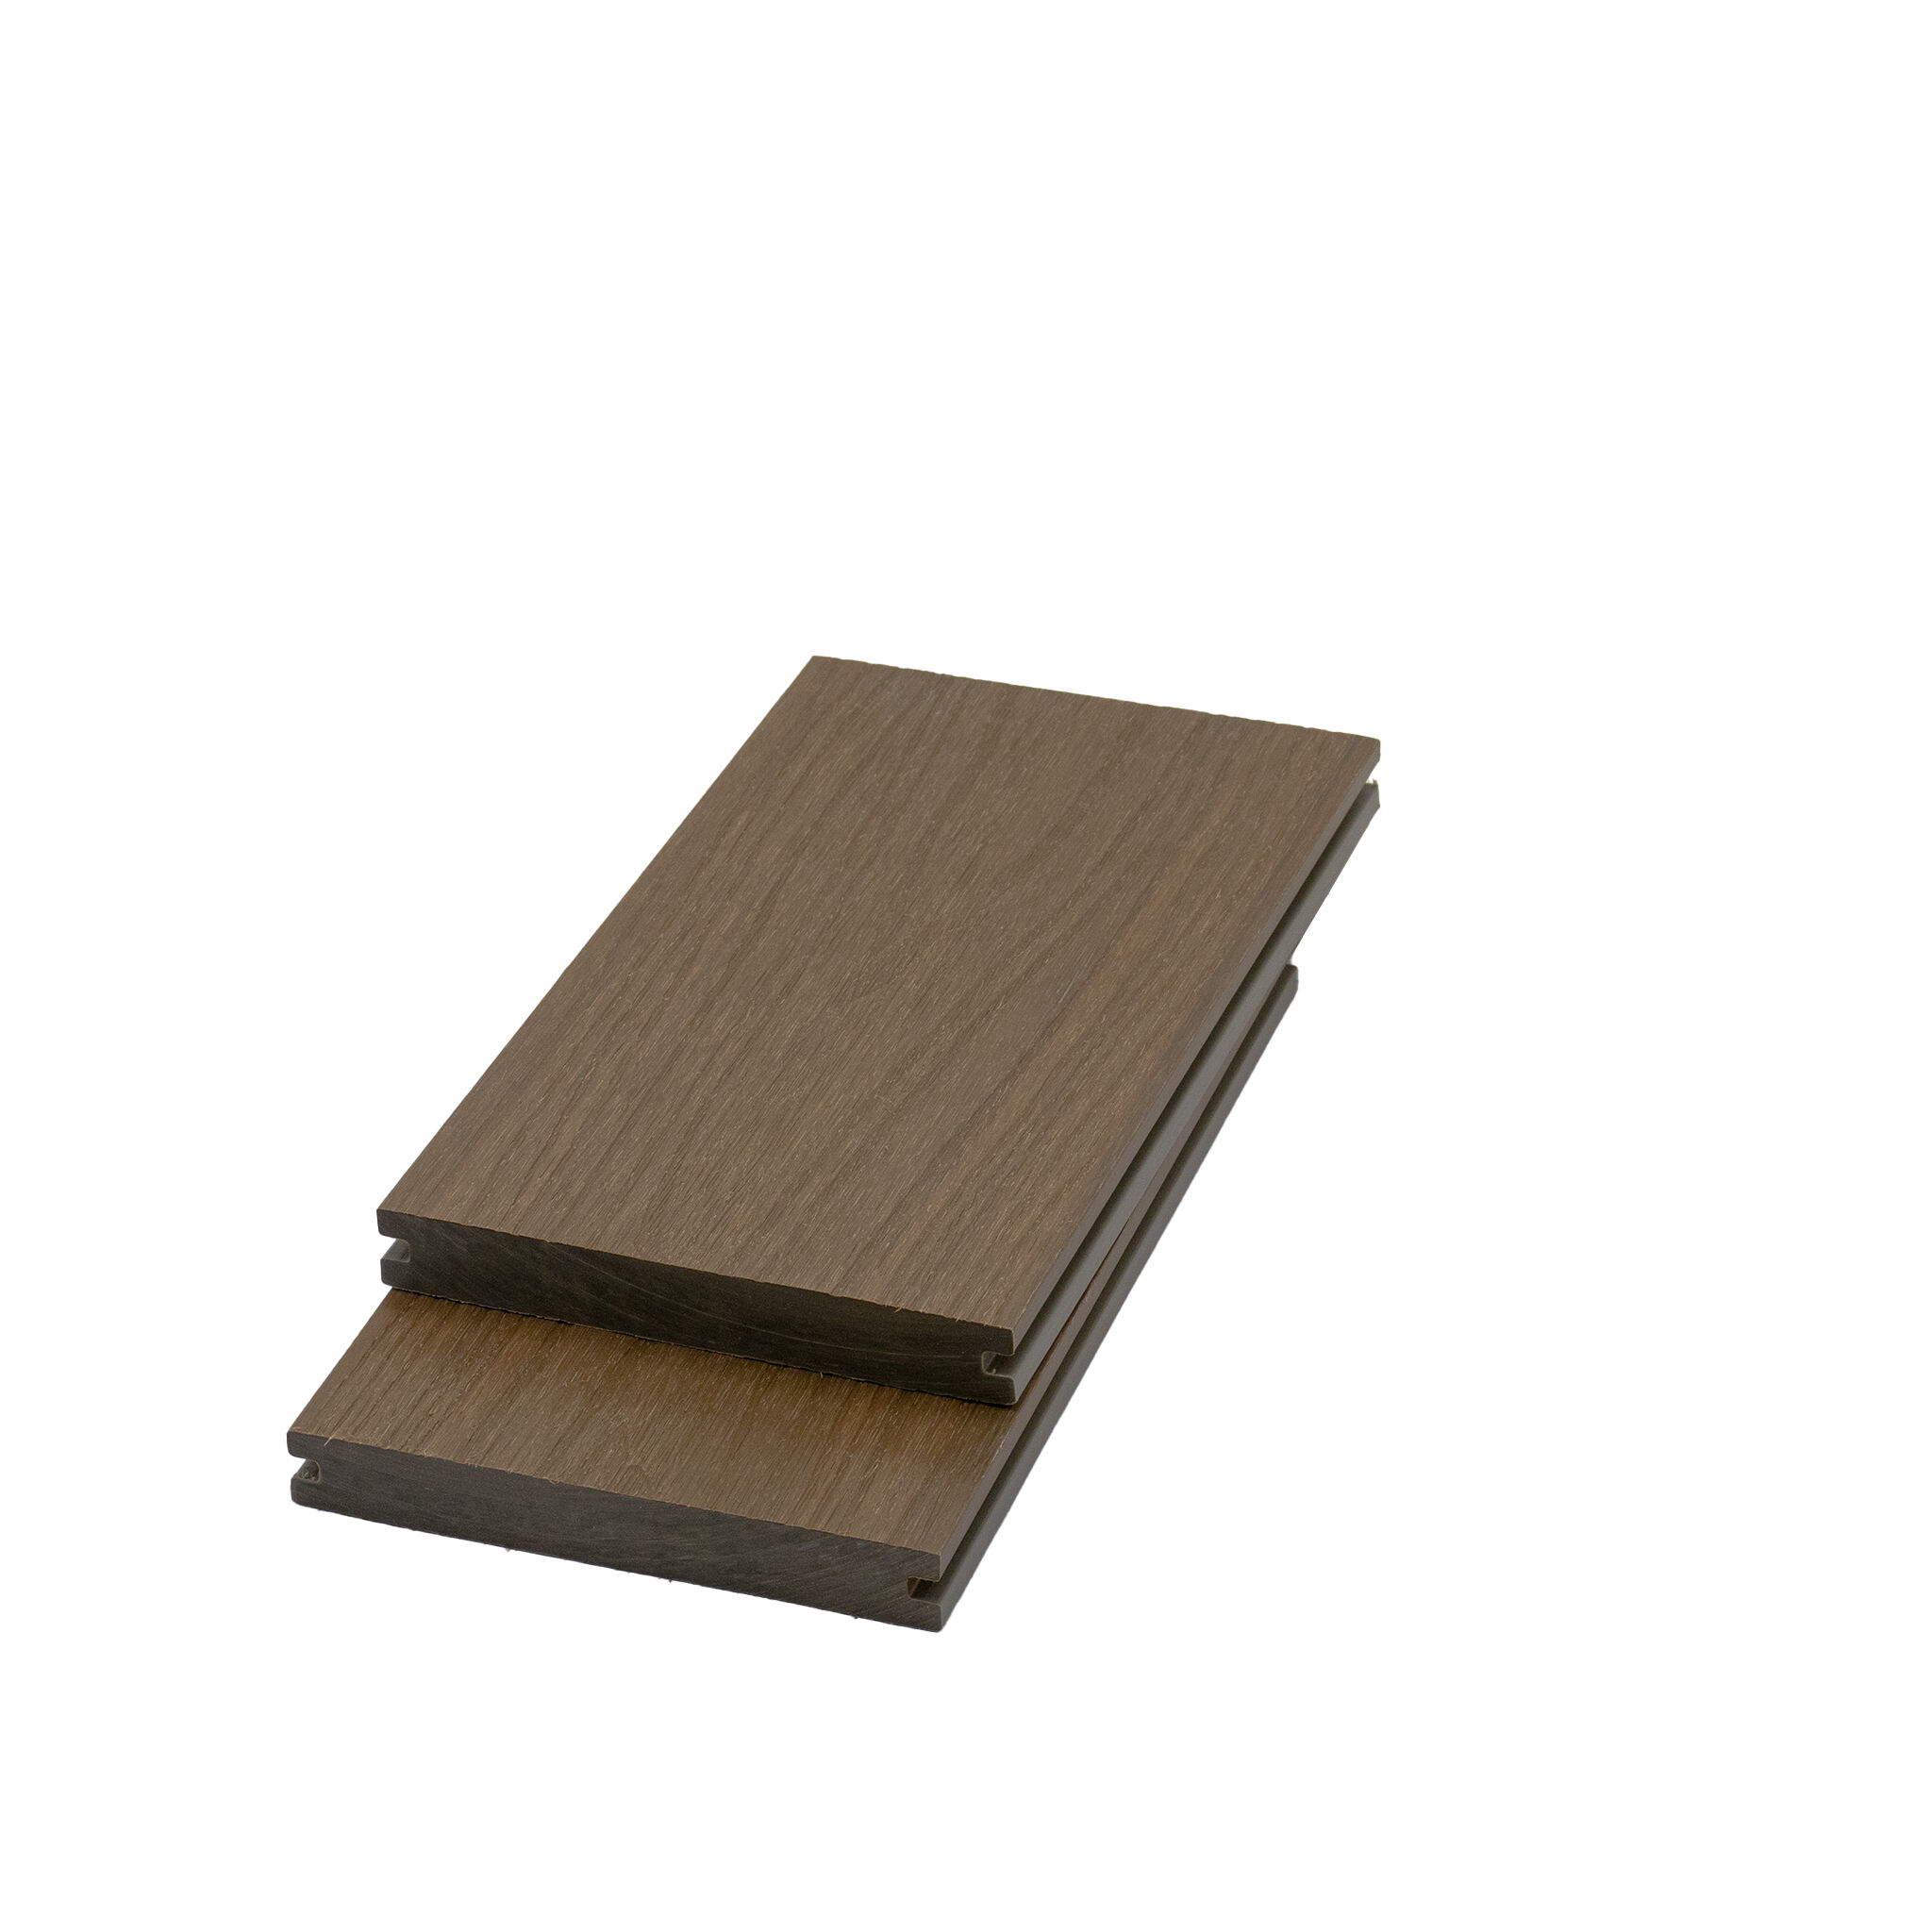 Co-Extrusion Solid Composite Decking  138S20- Advanced Technology -Outdoor WPC Capped Decking